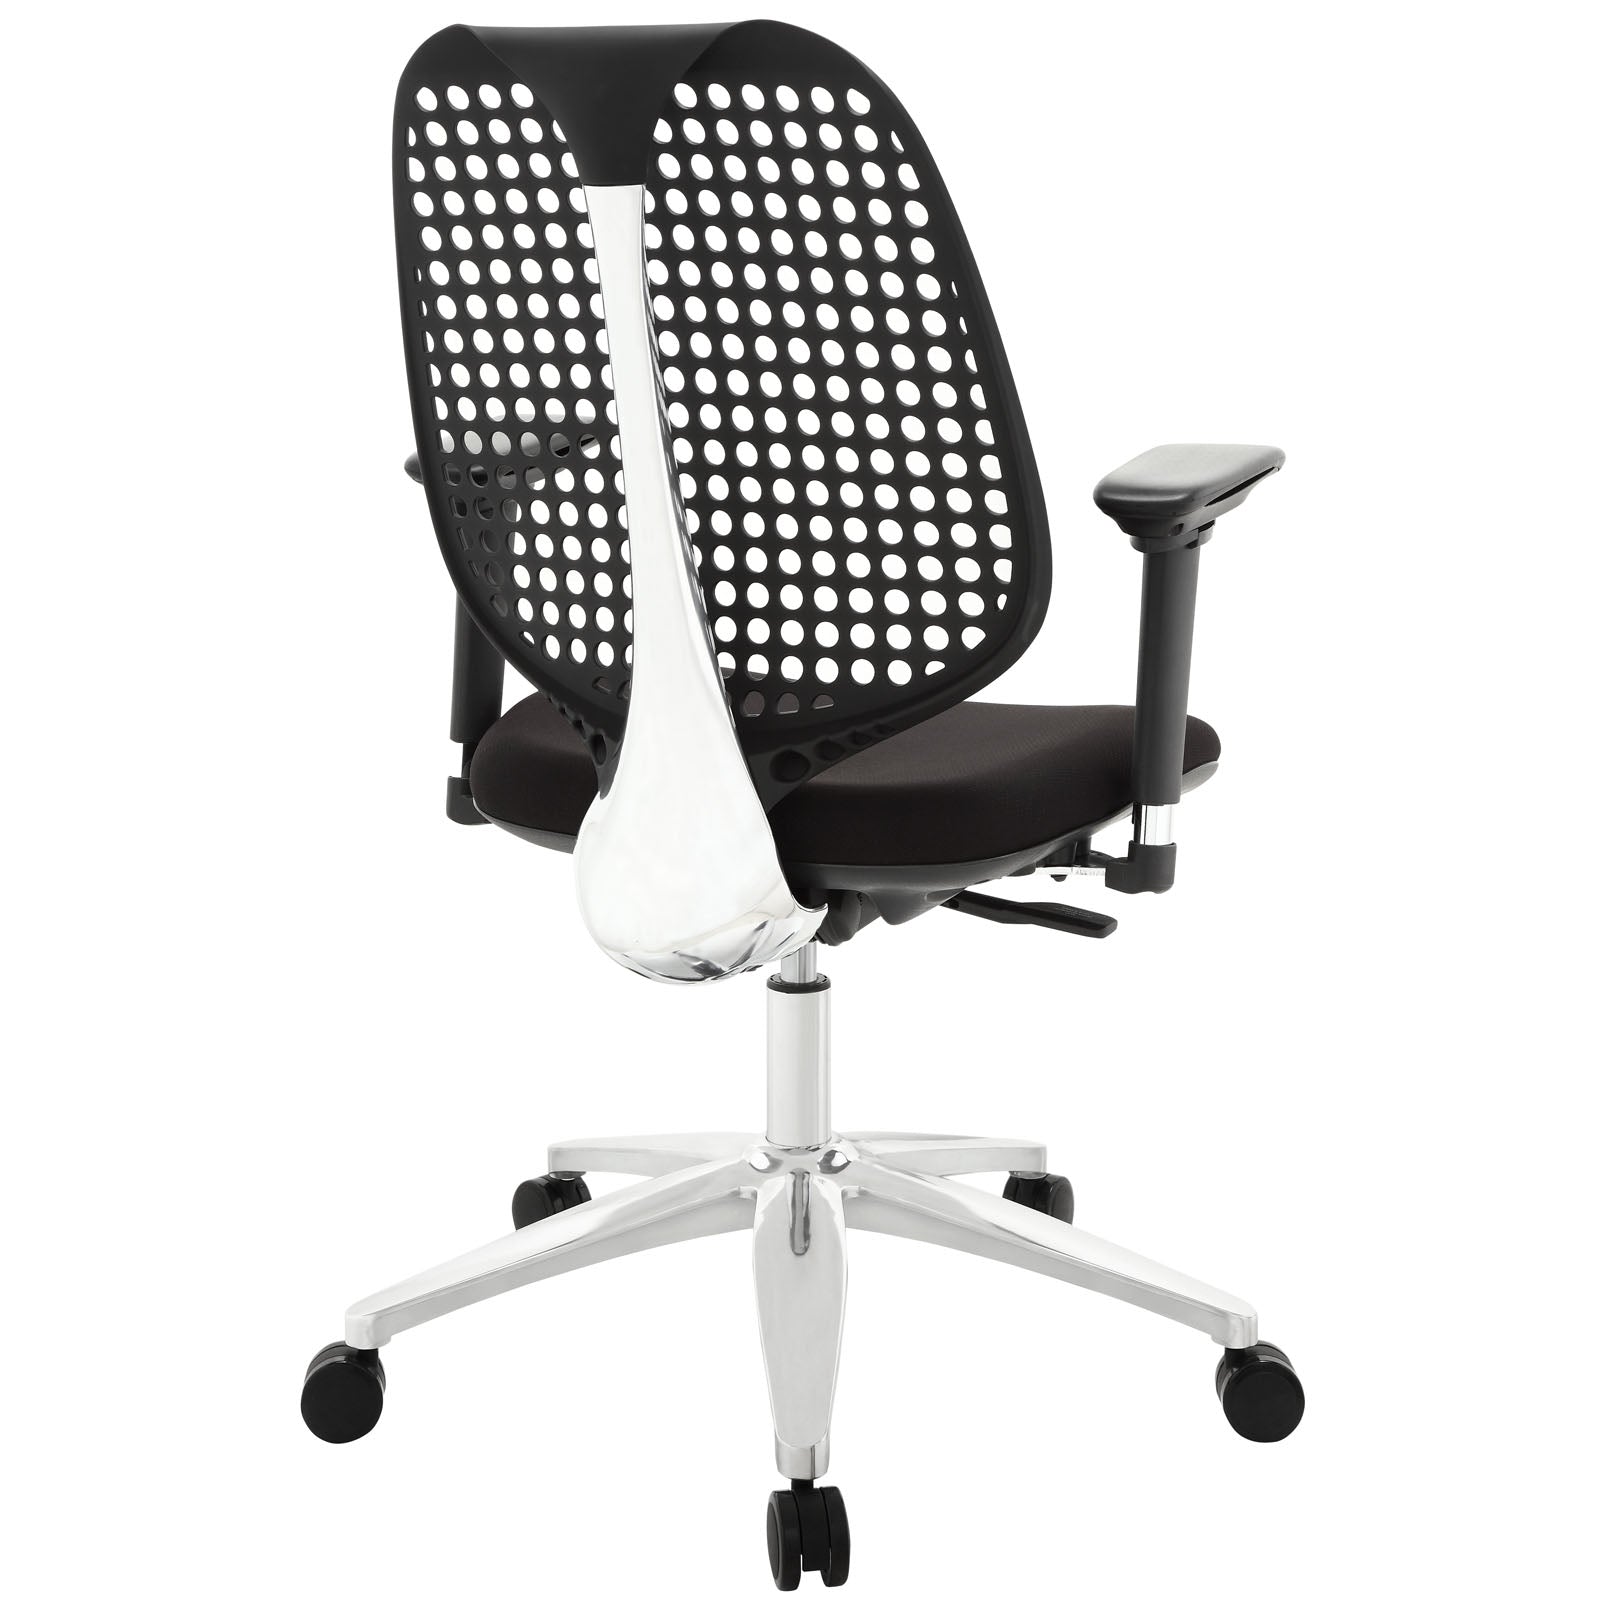 Modway Task Chairs - Reverb Premium Office Chair Black